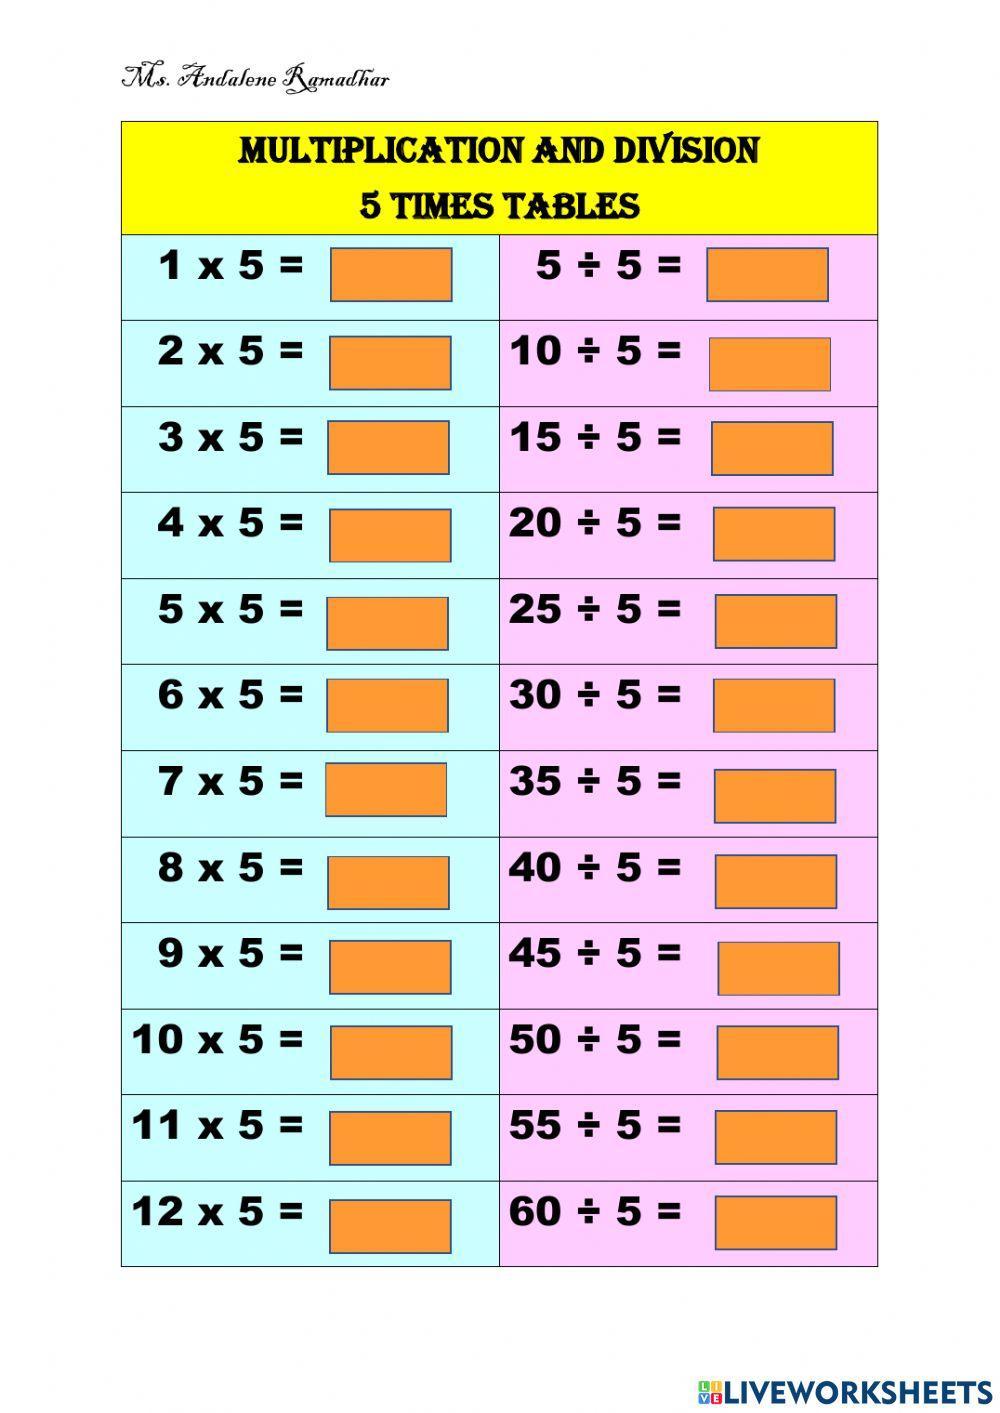 Multiplication and Division 5 Times Tables